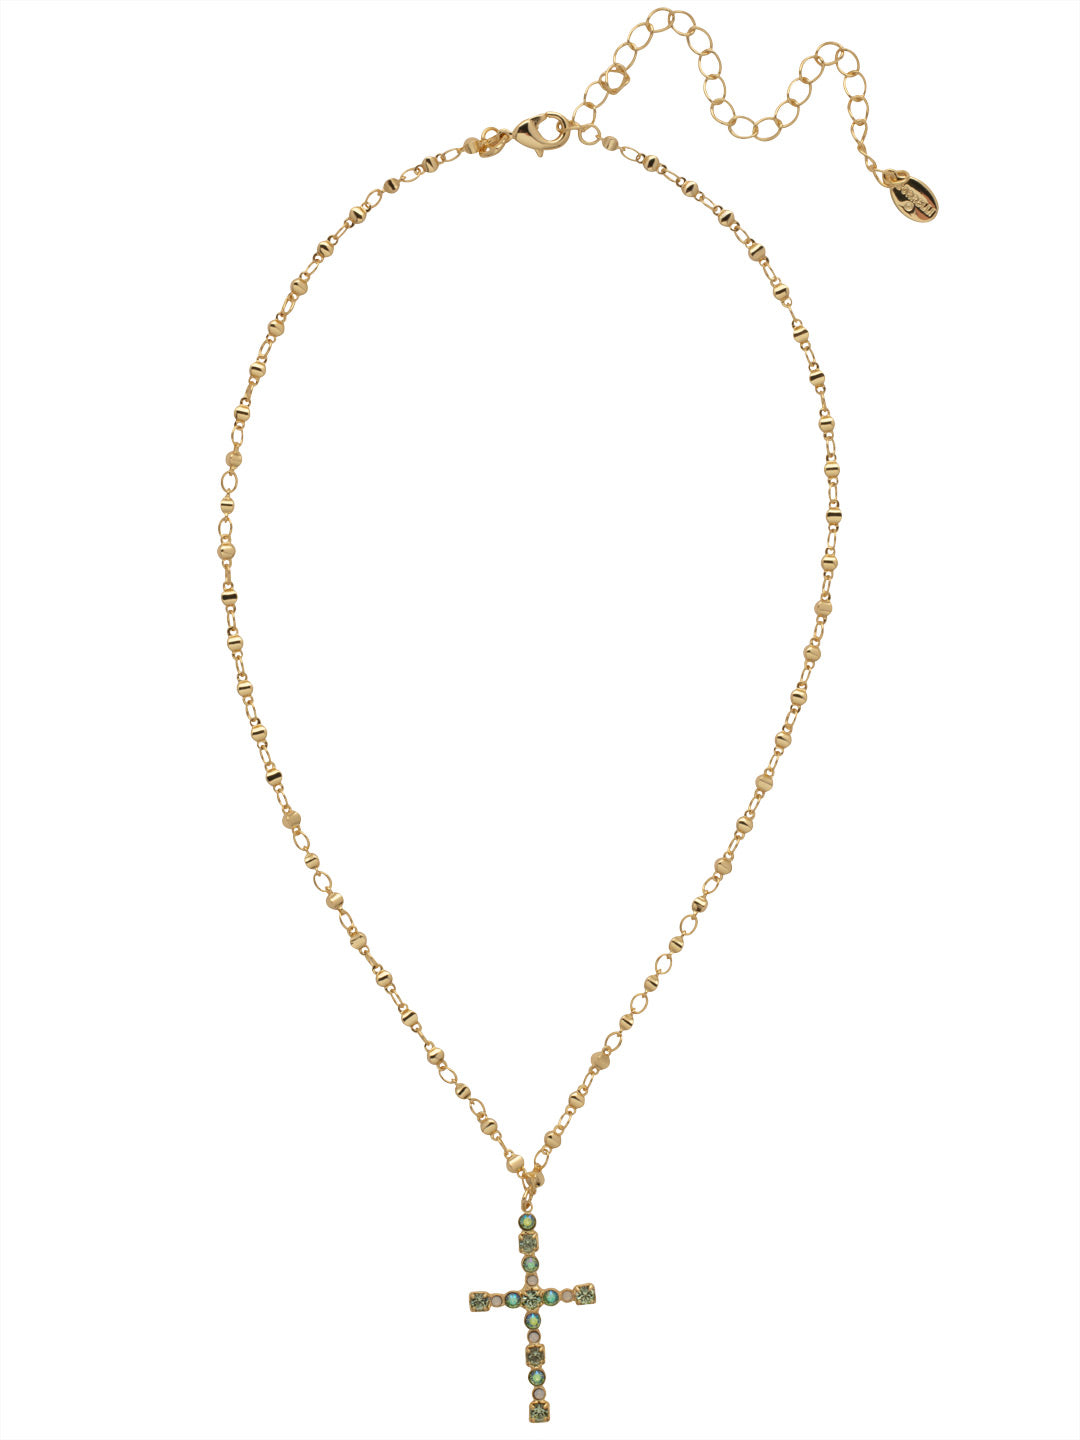 Charmaine Cross Pendant Necklace - NEX2BGSGR - <p>Perfect for any occasion, the Charmaine Cross Pendant Necklace spotlights a crystal studded cross on an adjustable chain. From Sorrelli's Sage Green collection in our Bright Gold-tone finish.</p>